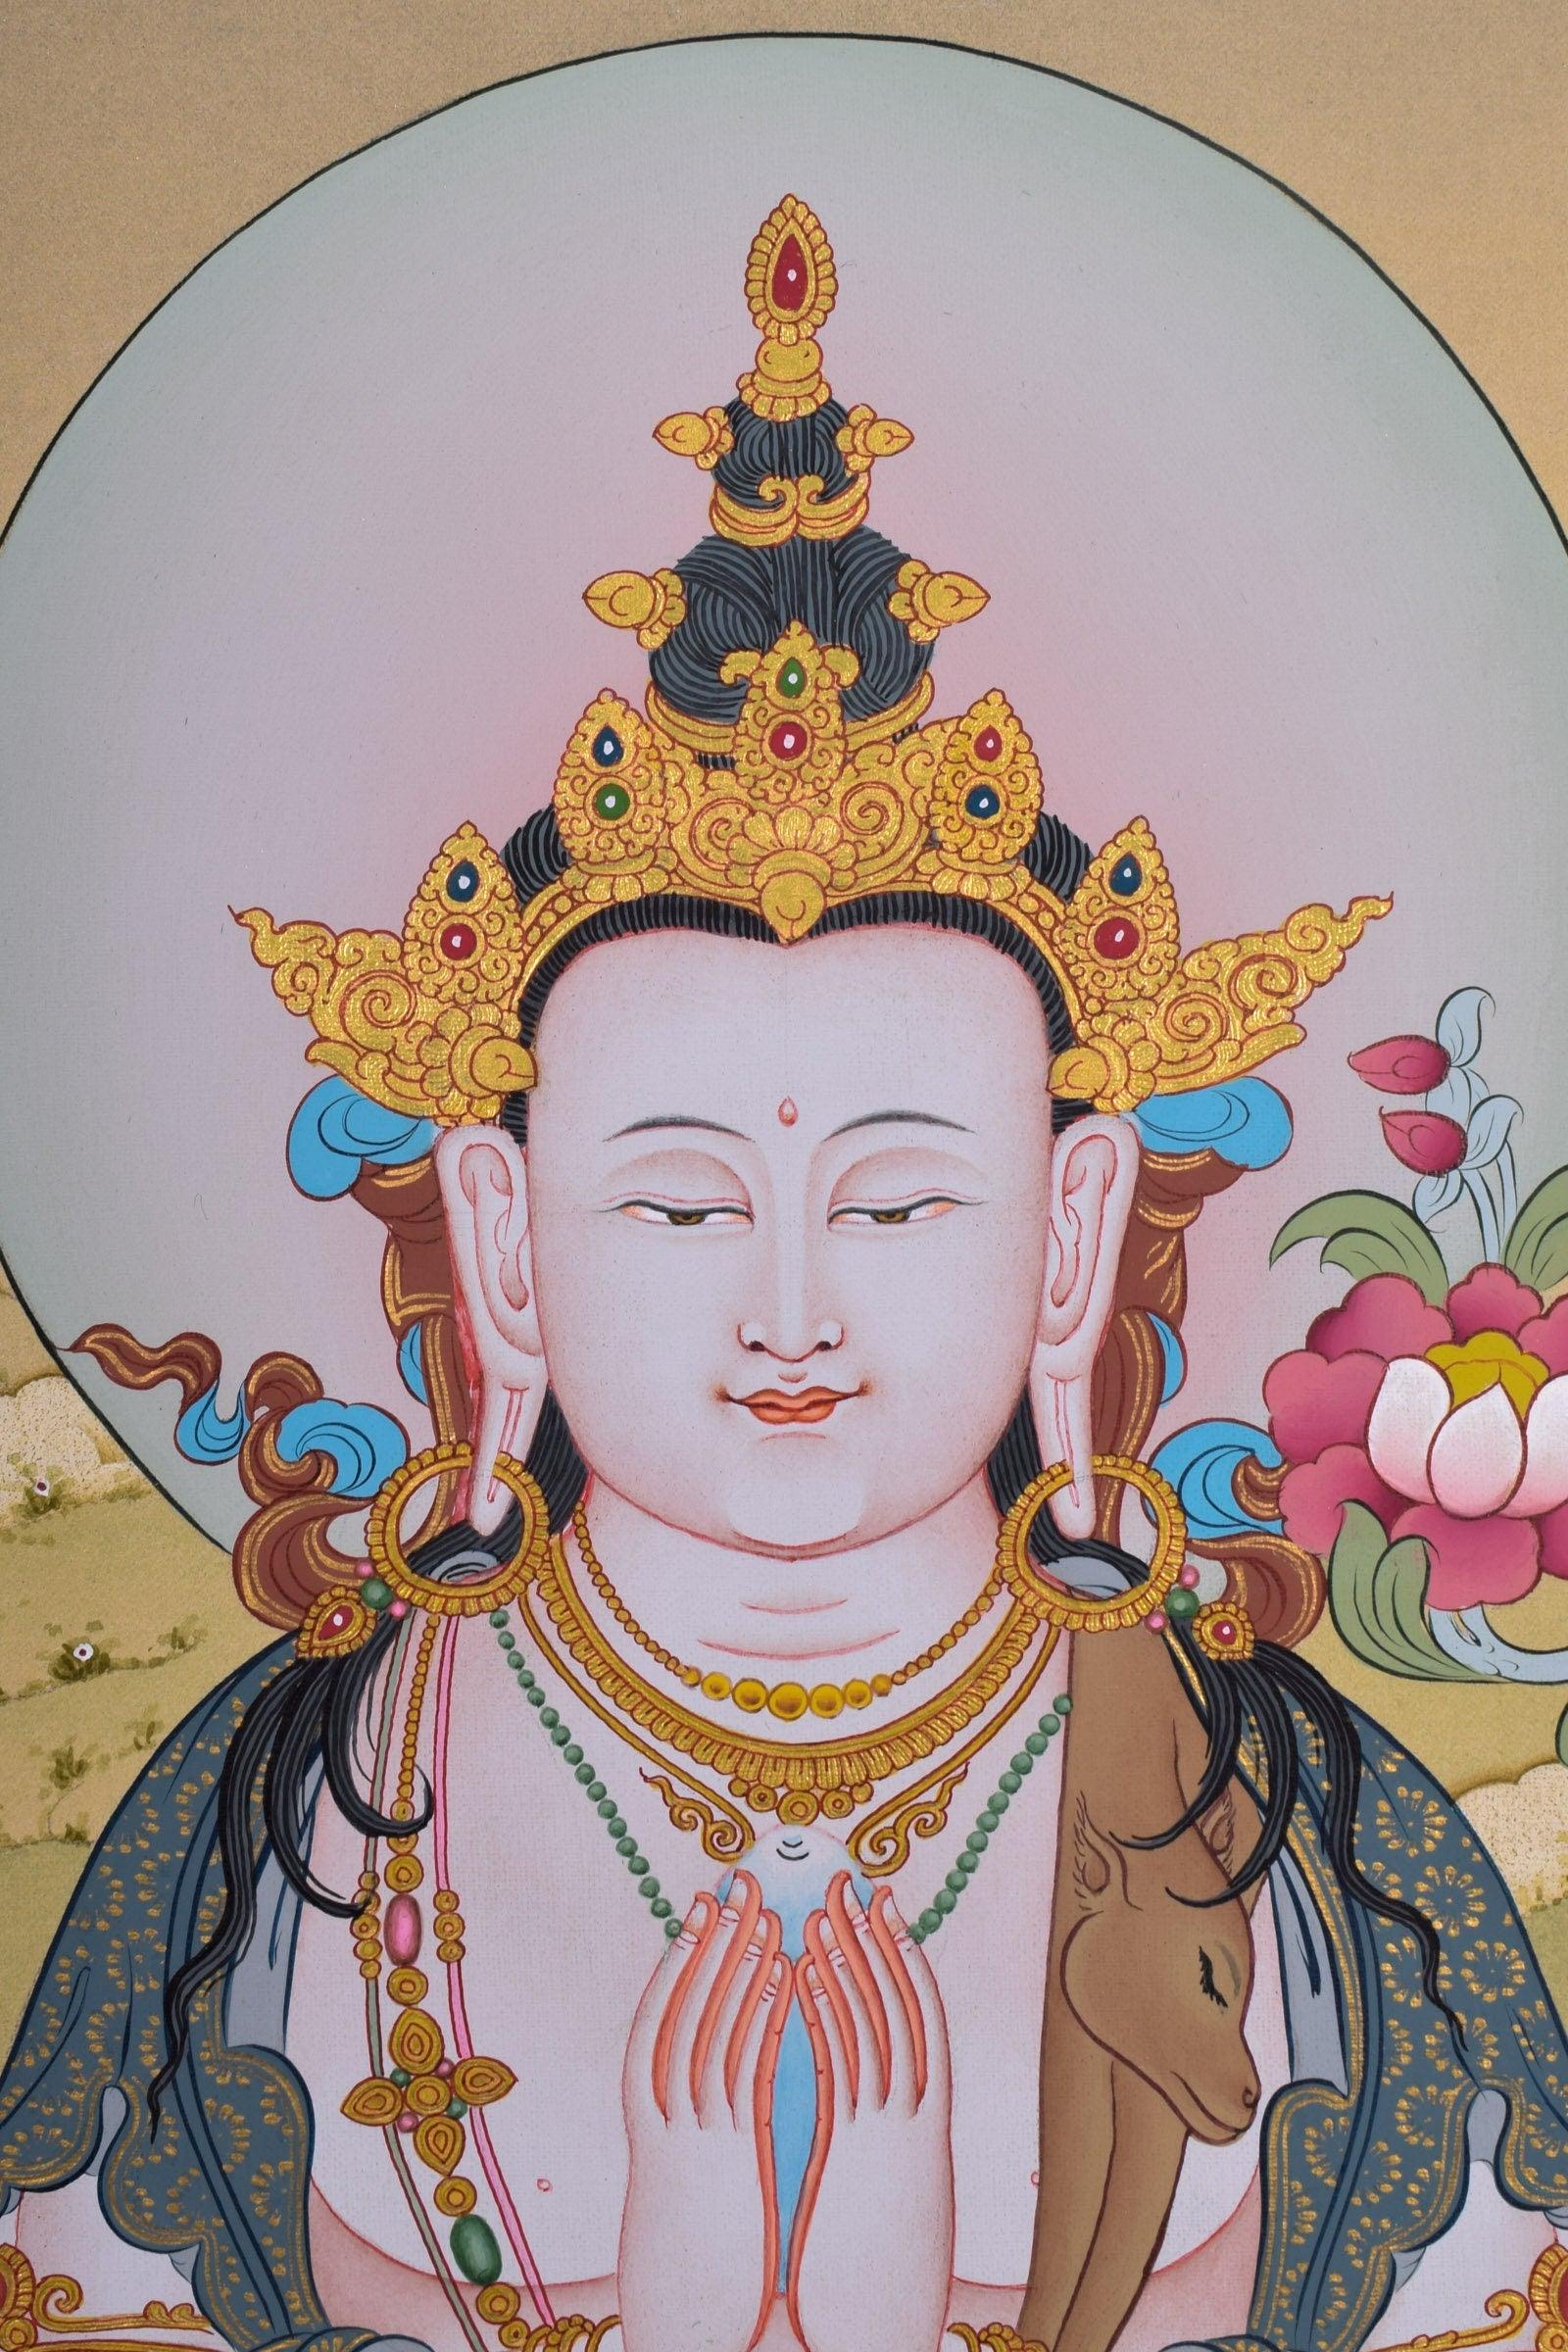 Chenrezig Thangka Painting For Meditational Practice and Spiritual Gifts